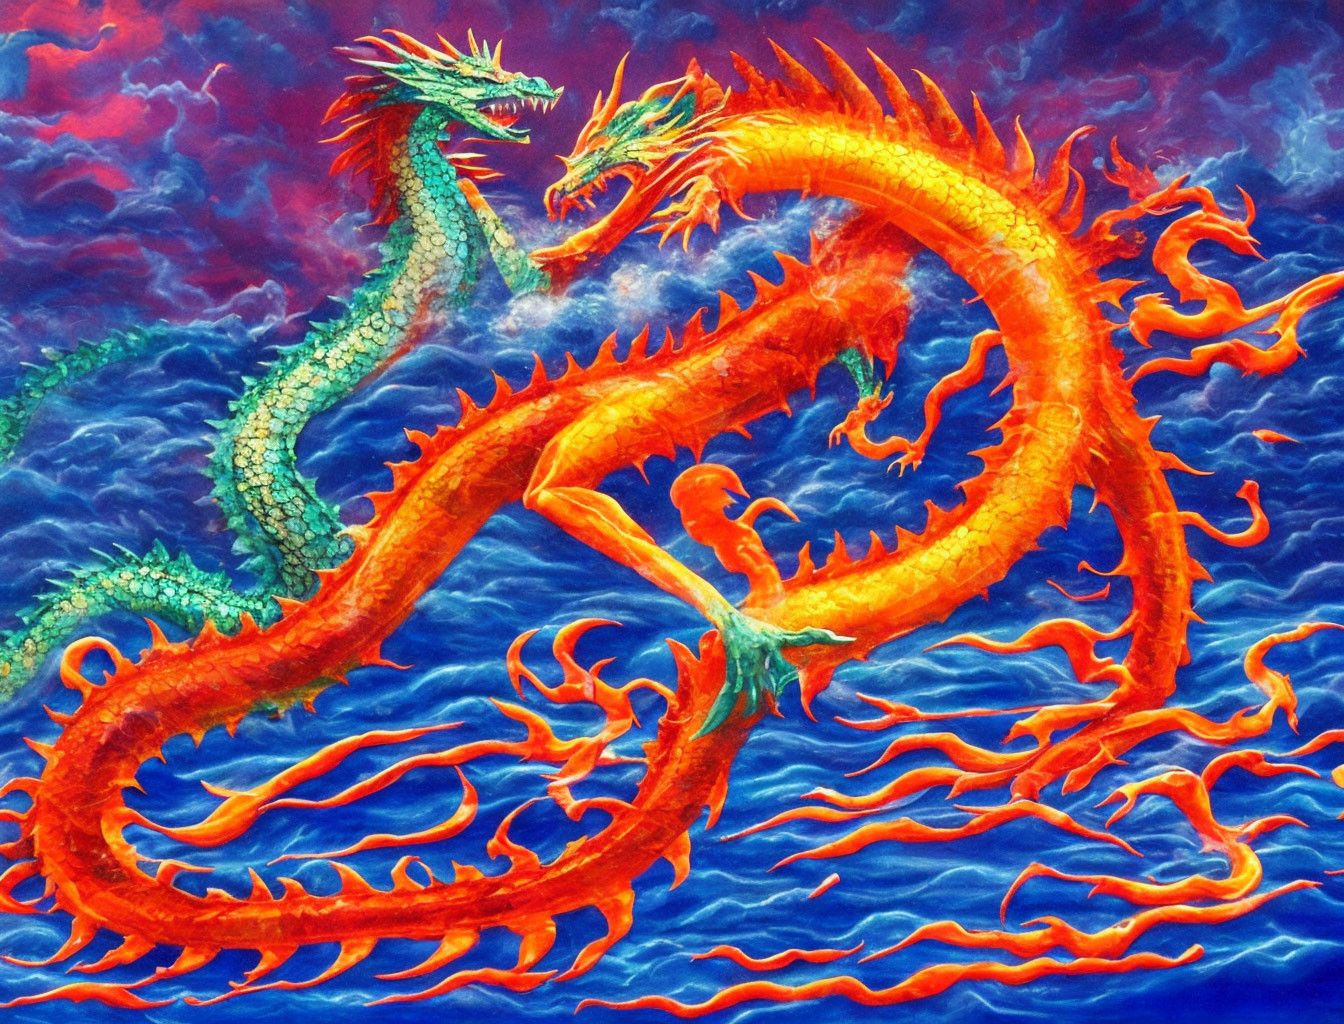 Mythical fiery orange dragon painting with blue and green mane in dramatic sky